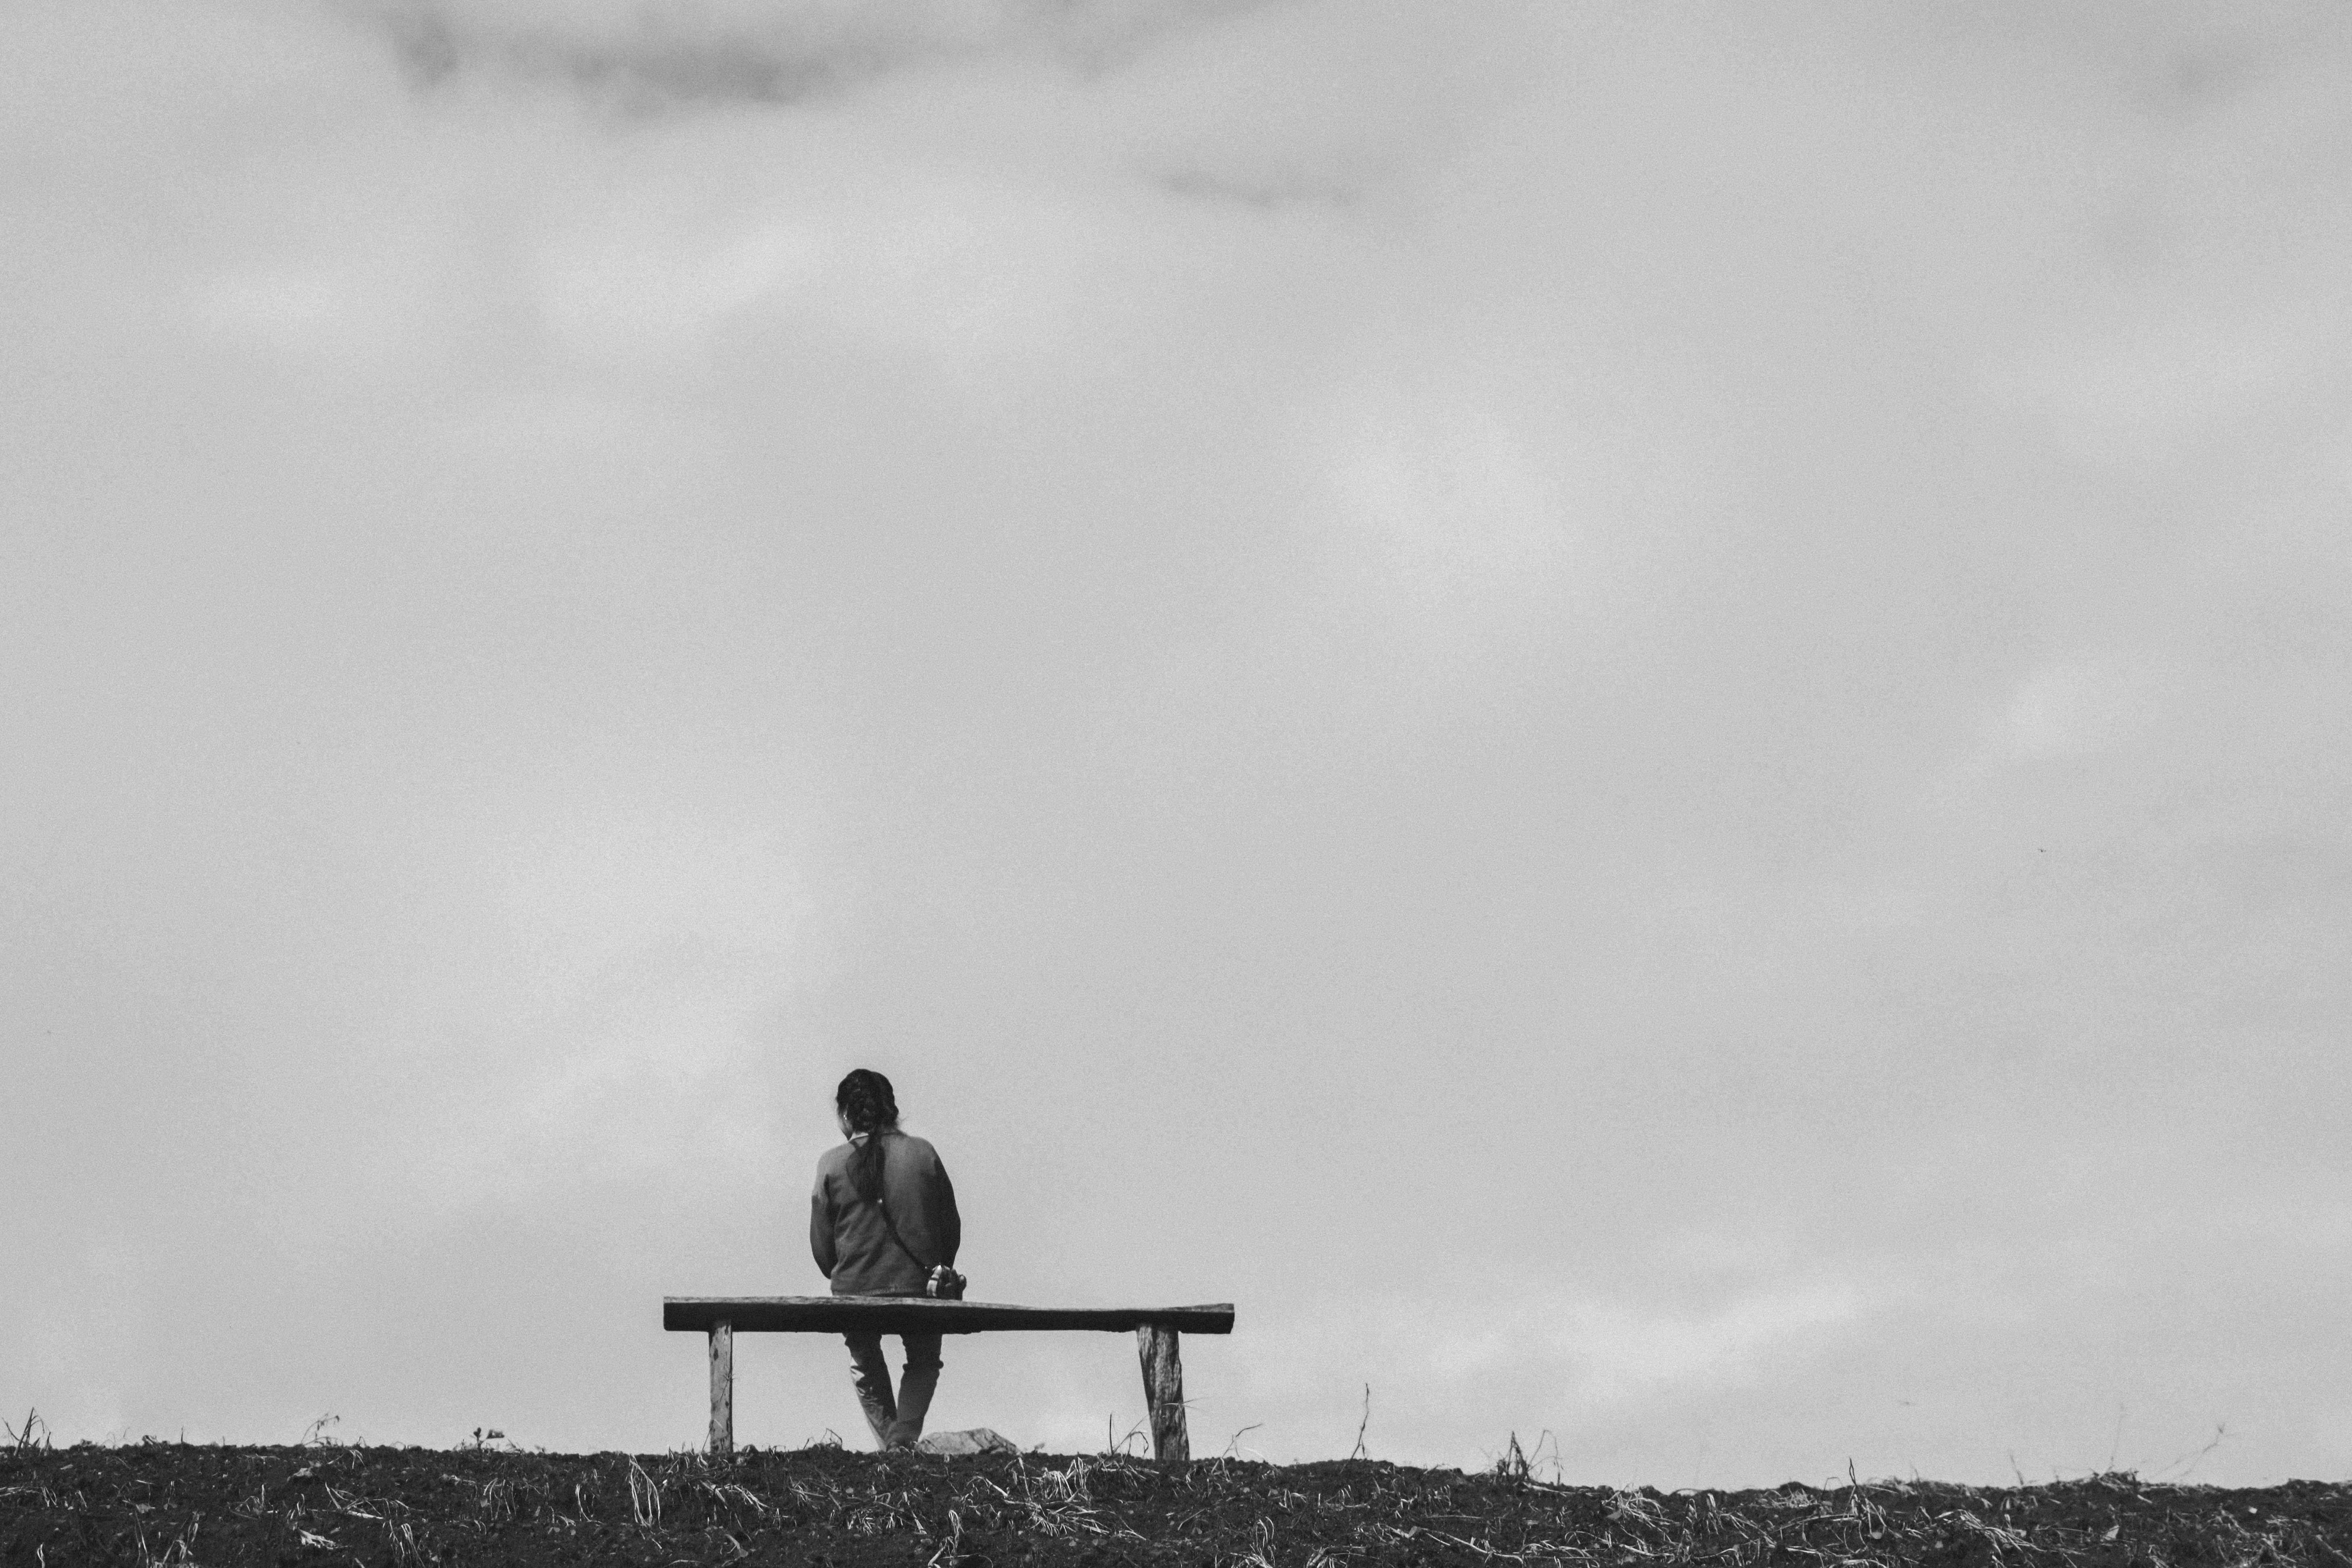 miscellanea, miscellaneous, bw, chb, human, person, loneliness, bench Panoramic Wallpaper